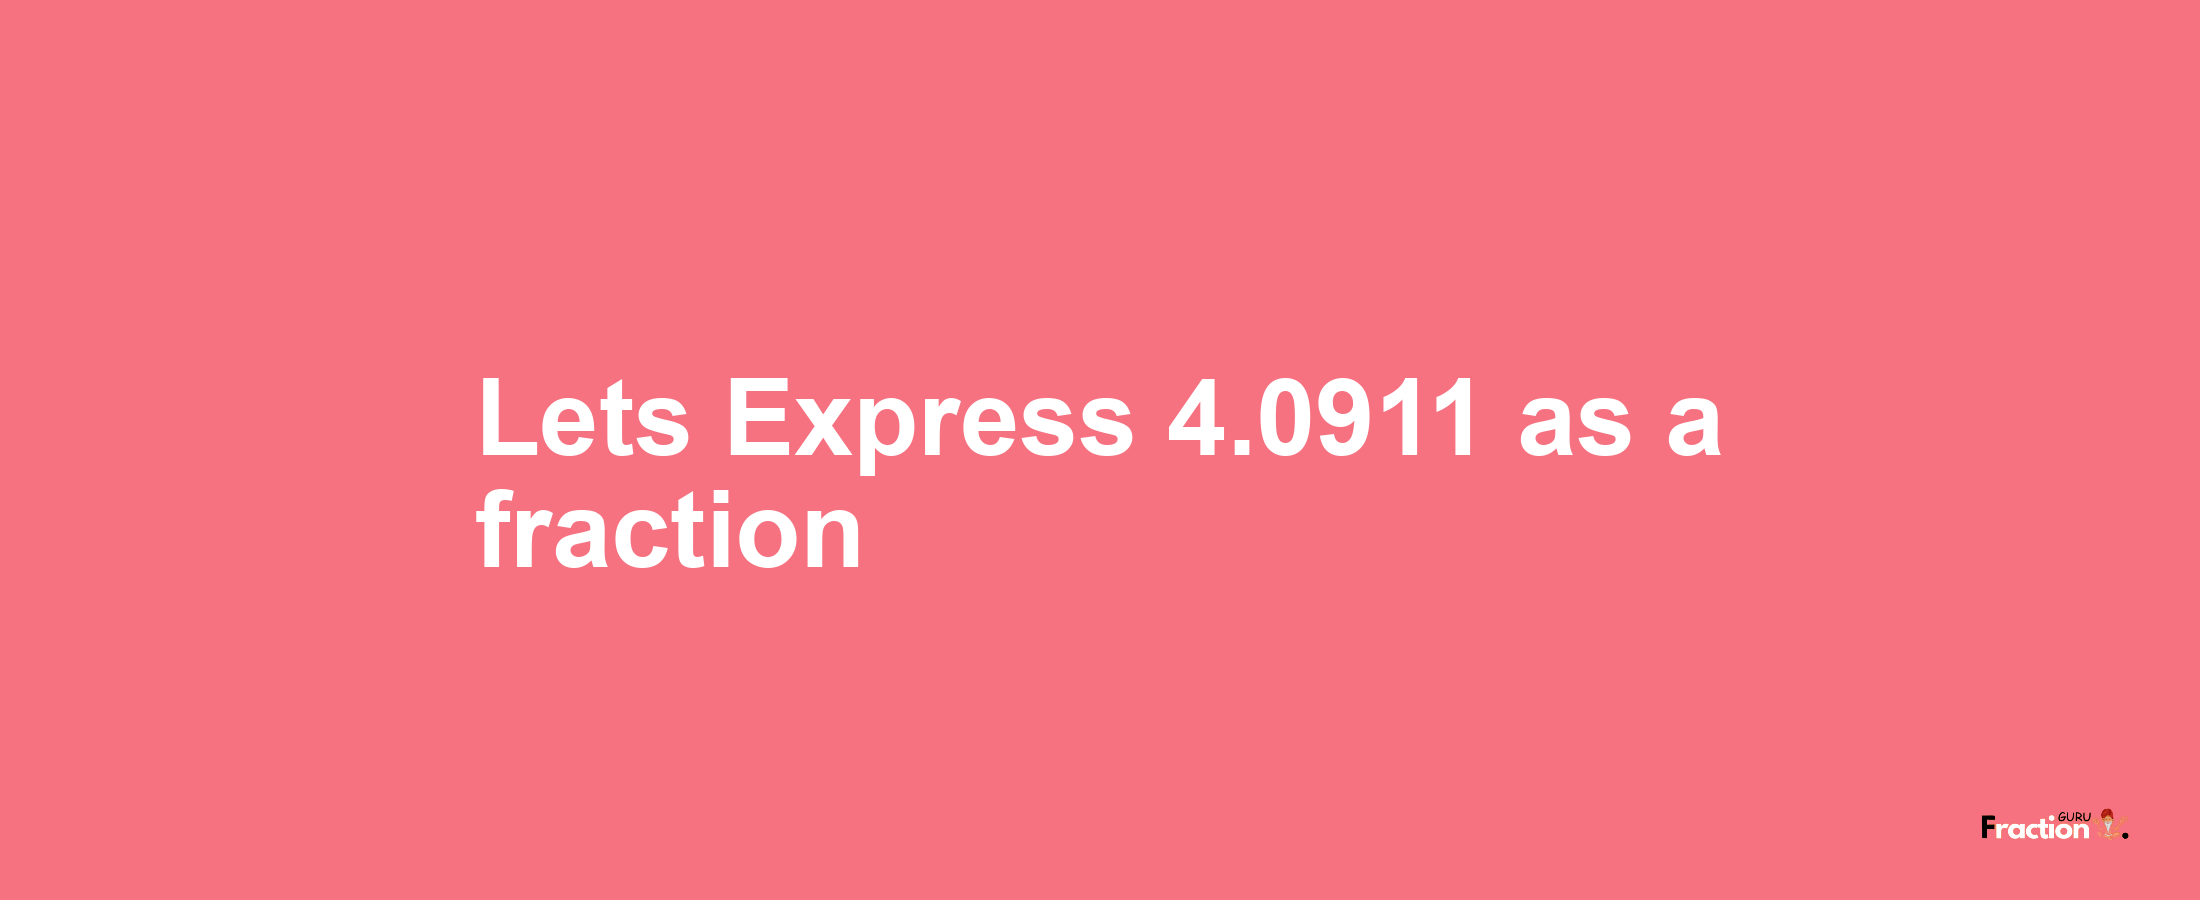 Lets Express 4.0911 as afraction